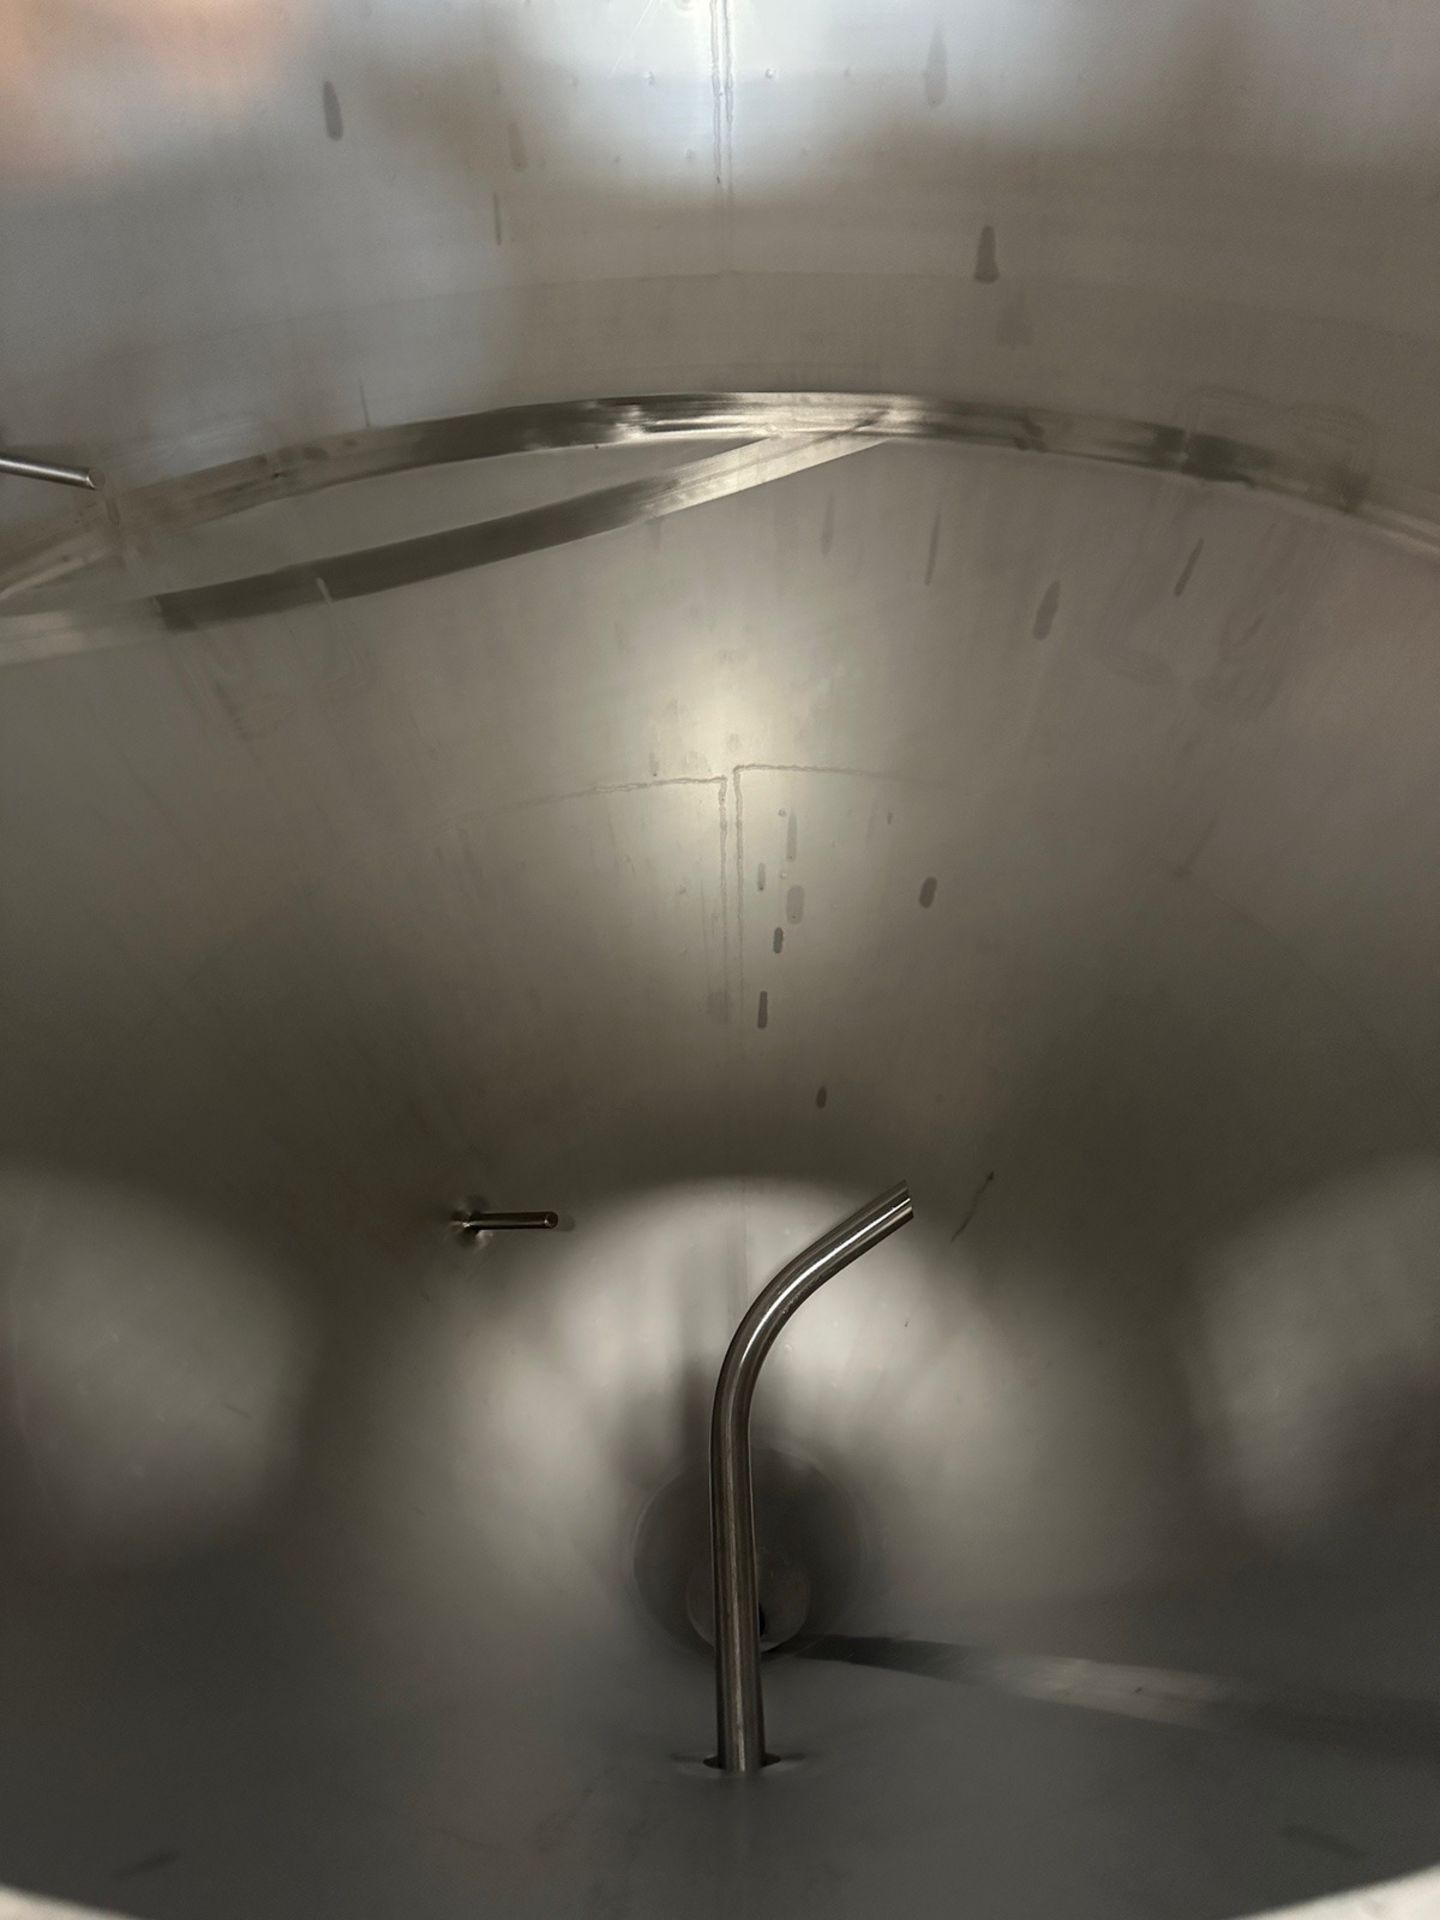 30 BBL Stainless Steel Fermentation Tank - Cone Bottom, Glycol Jacketed, | Rig Fee $1250 - Image 3 of 4